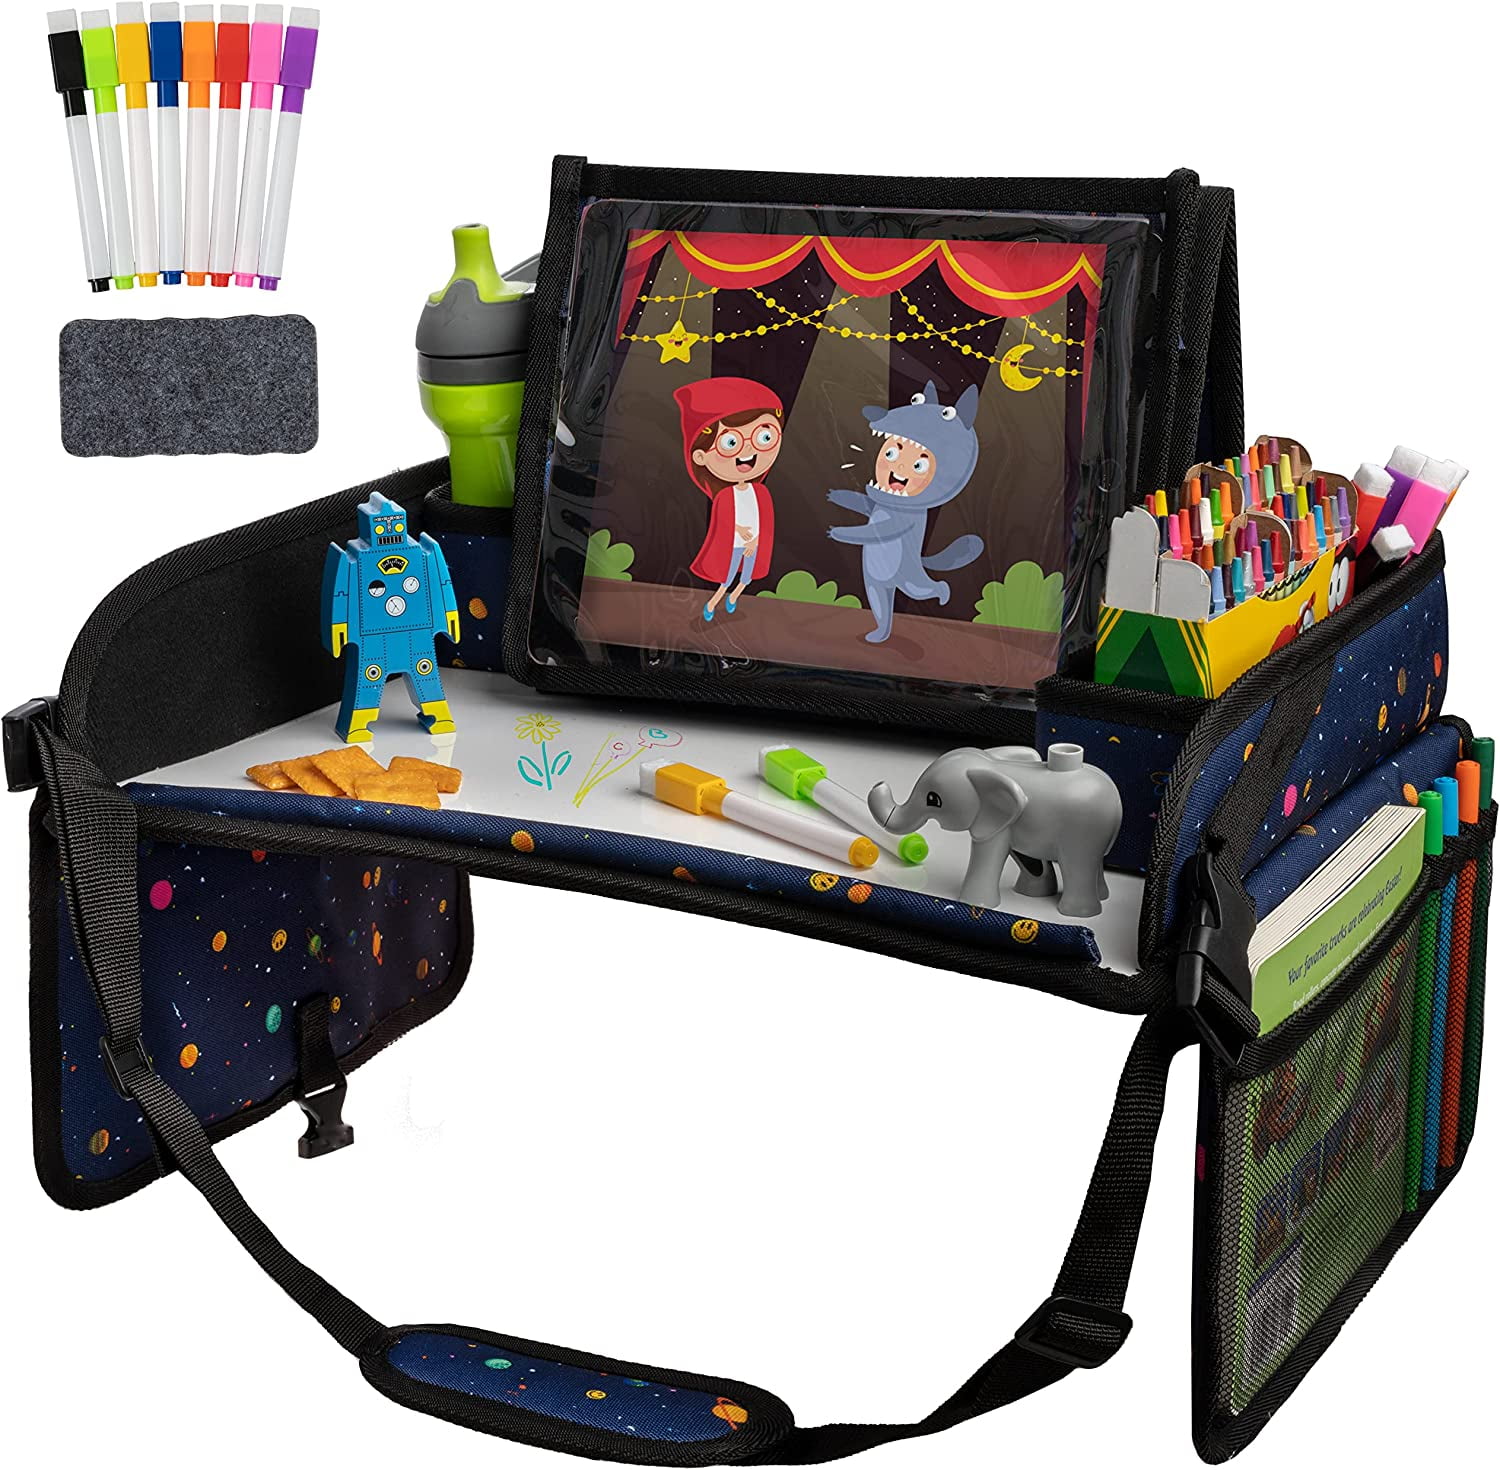  JUNGLE FEELS Kids Travel Tray for Road Trip Essentials